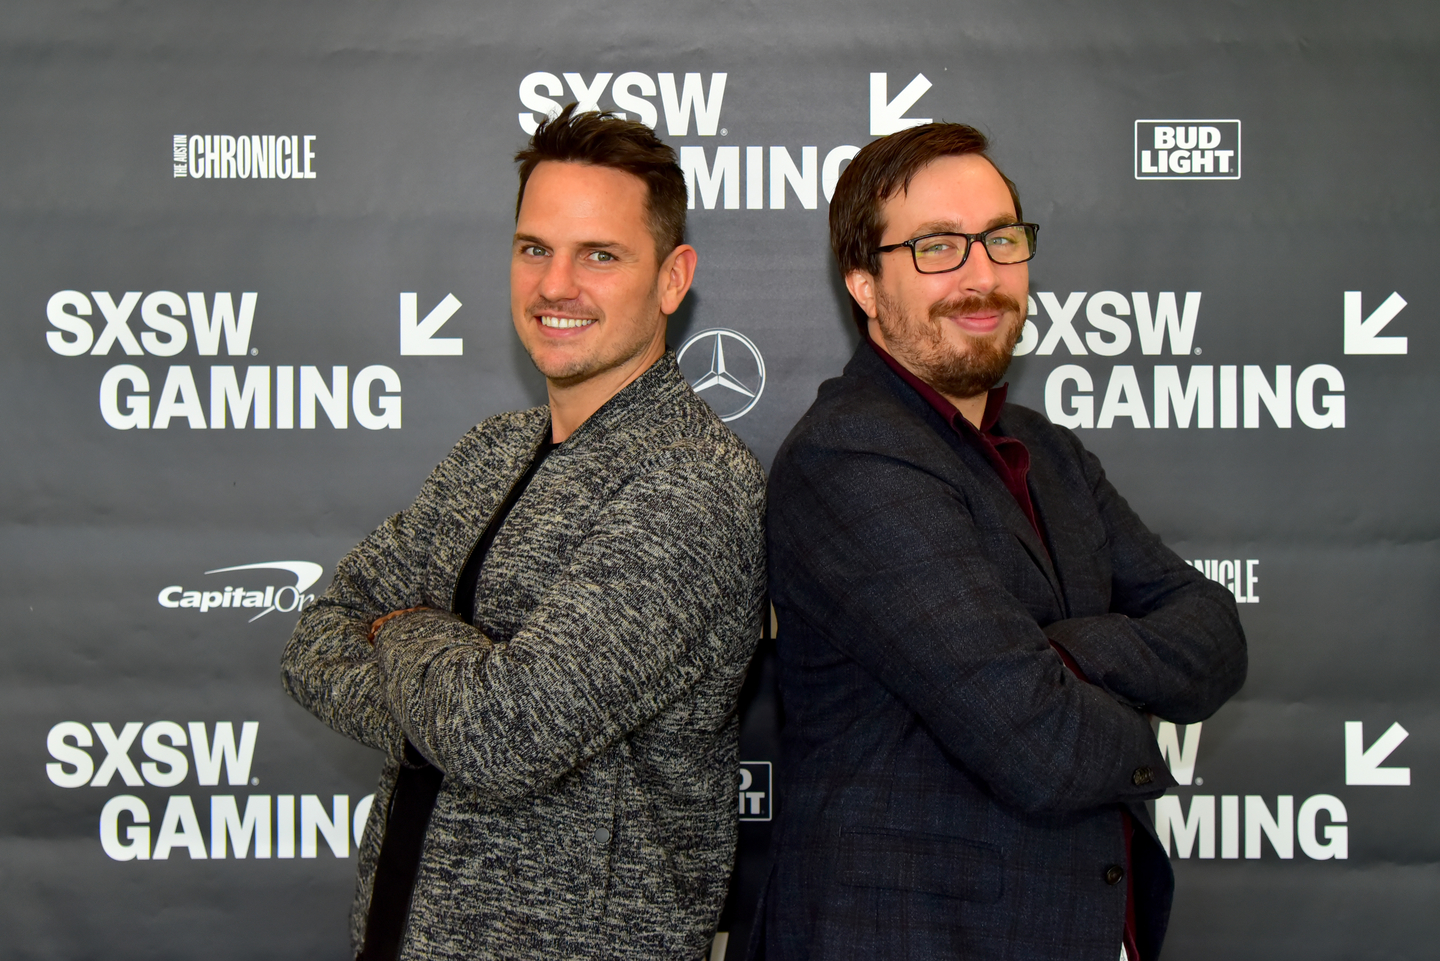 Sam Mathews (L) and Travis Gafford joined “The Rise of the New World Sports, Esports” session, part of SXSW Gaming. Photo by Jason Bollenbacher/Getty Images for SXSW